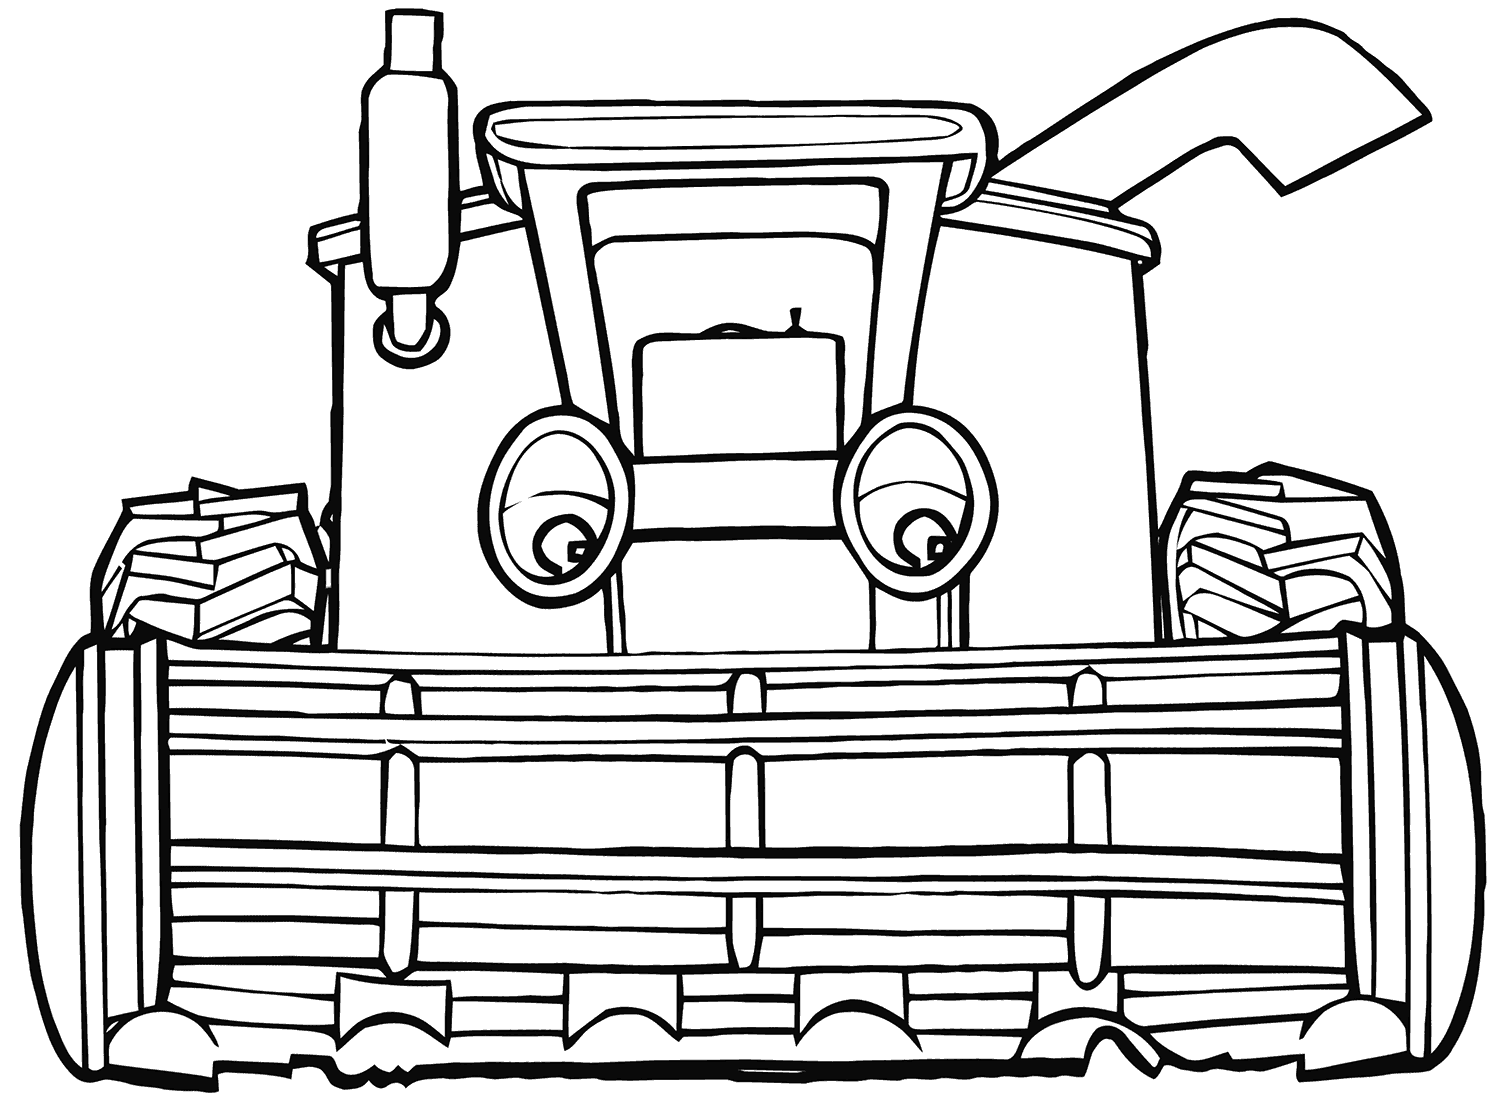 combine harvester colouring pages combine harvester coloring pages coloring pages to harvester combine colouring pages 